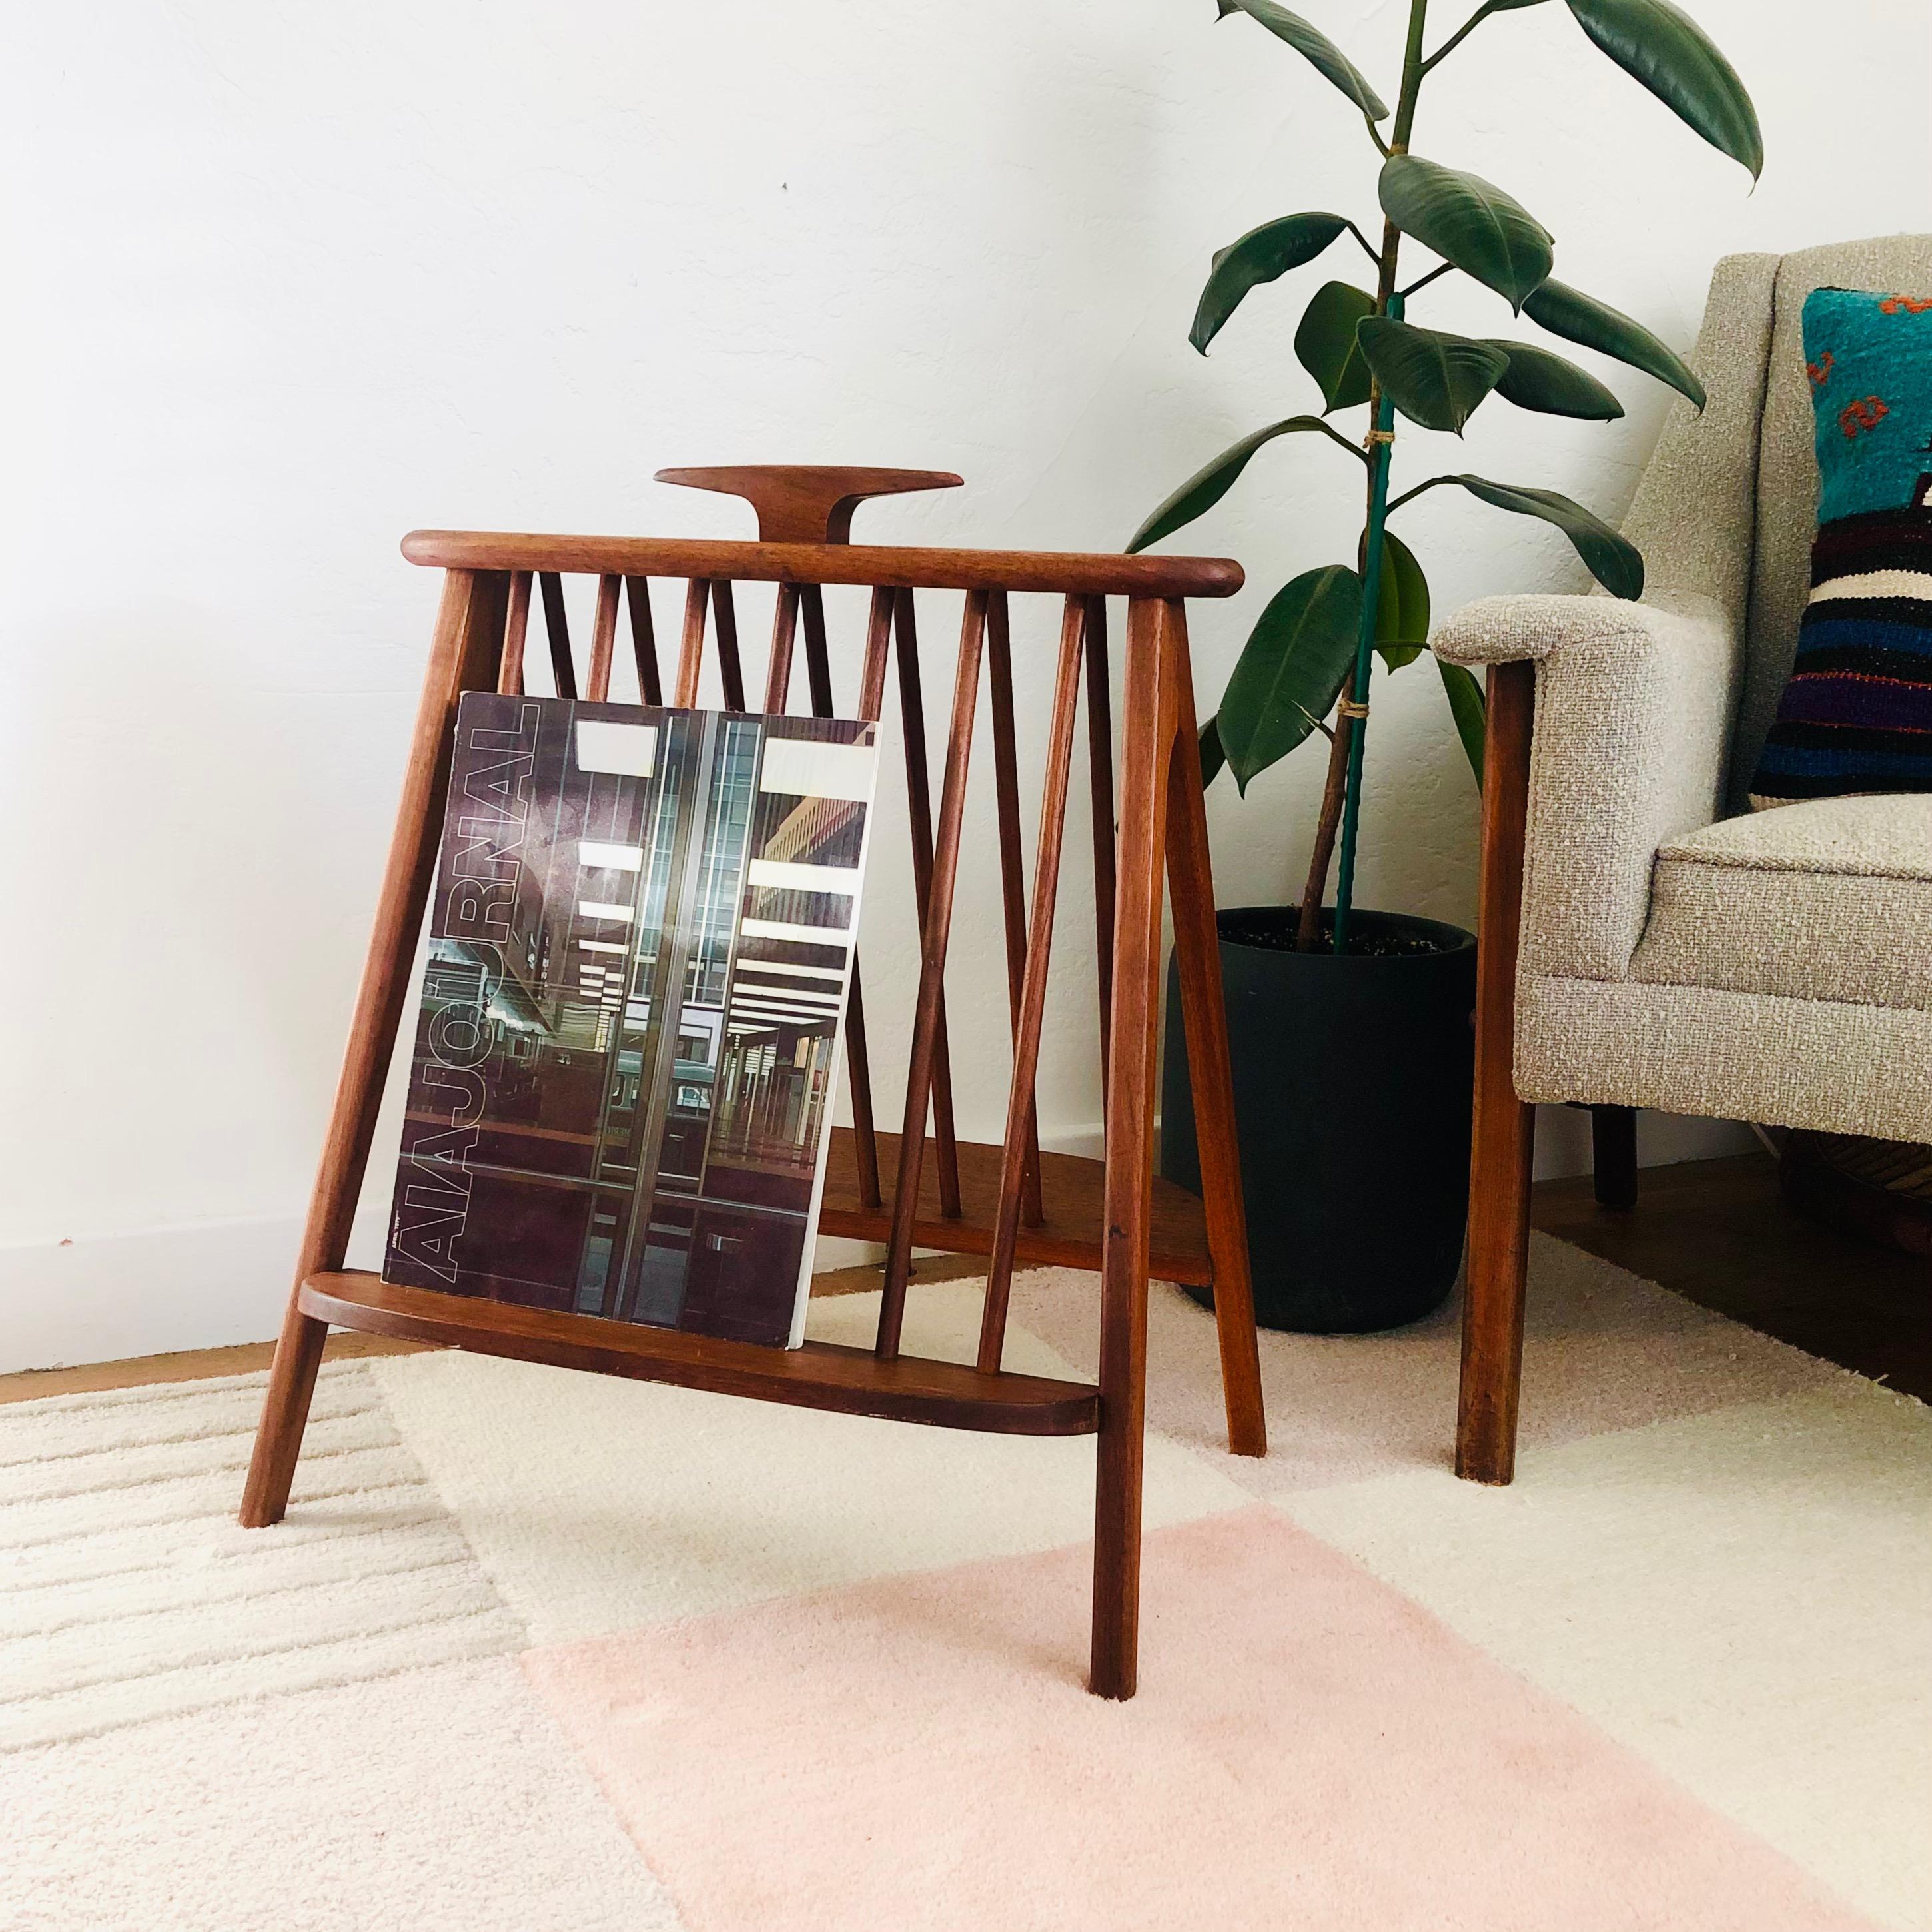 A mid-century walnut magazine rack designed by Arthur Umanoff for Washington Woodcraft. Elegantly designed with a spindle back frame and 2 ledges for holding magazines or books on either sides. Topped off by a sculpted wood handle.
 